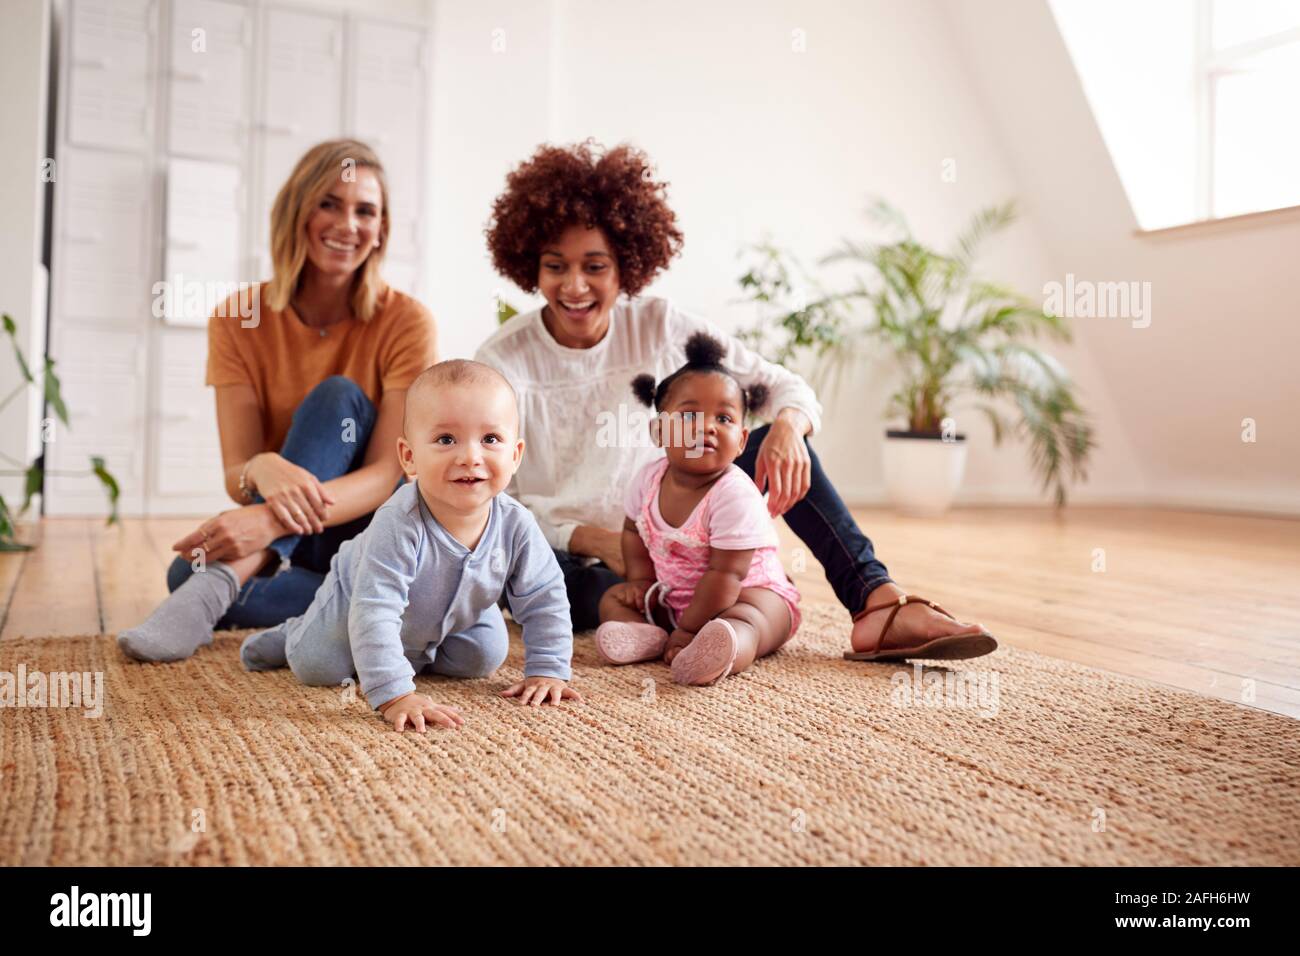 Portrait Of Two Mothers Meeting For Play Date With Babies At Home In Loft Apartment Stock Photo